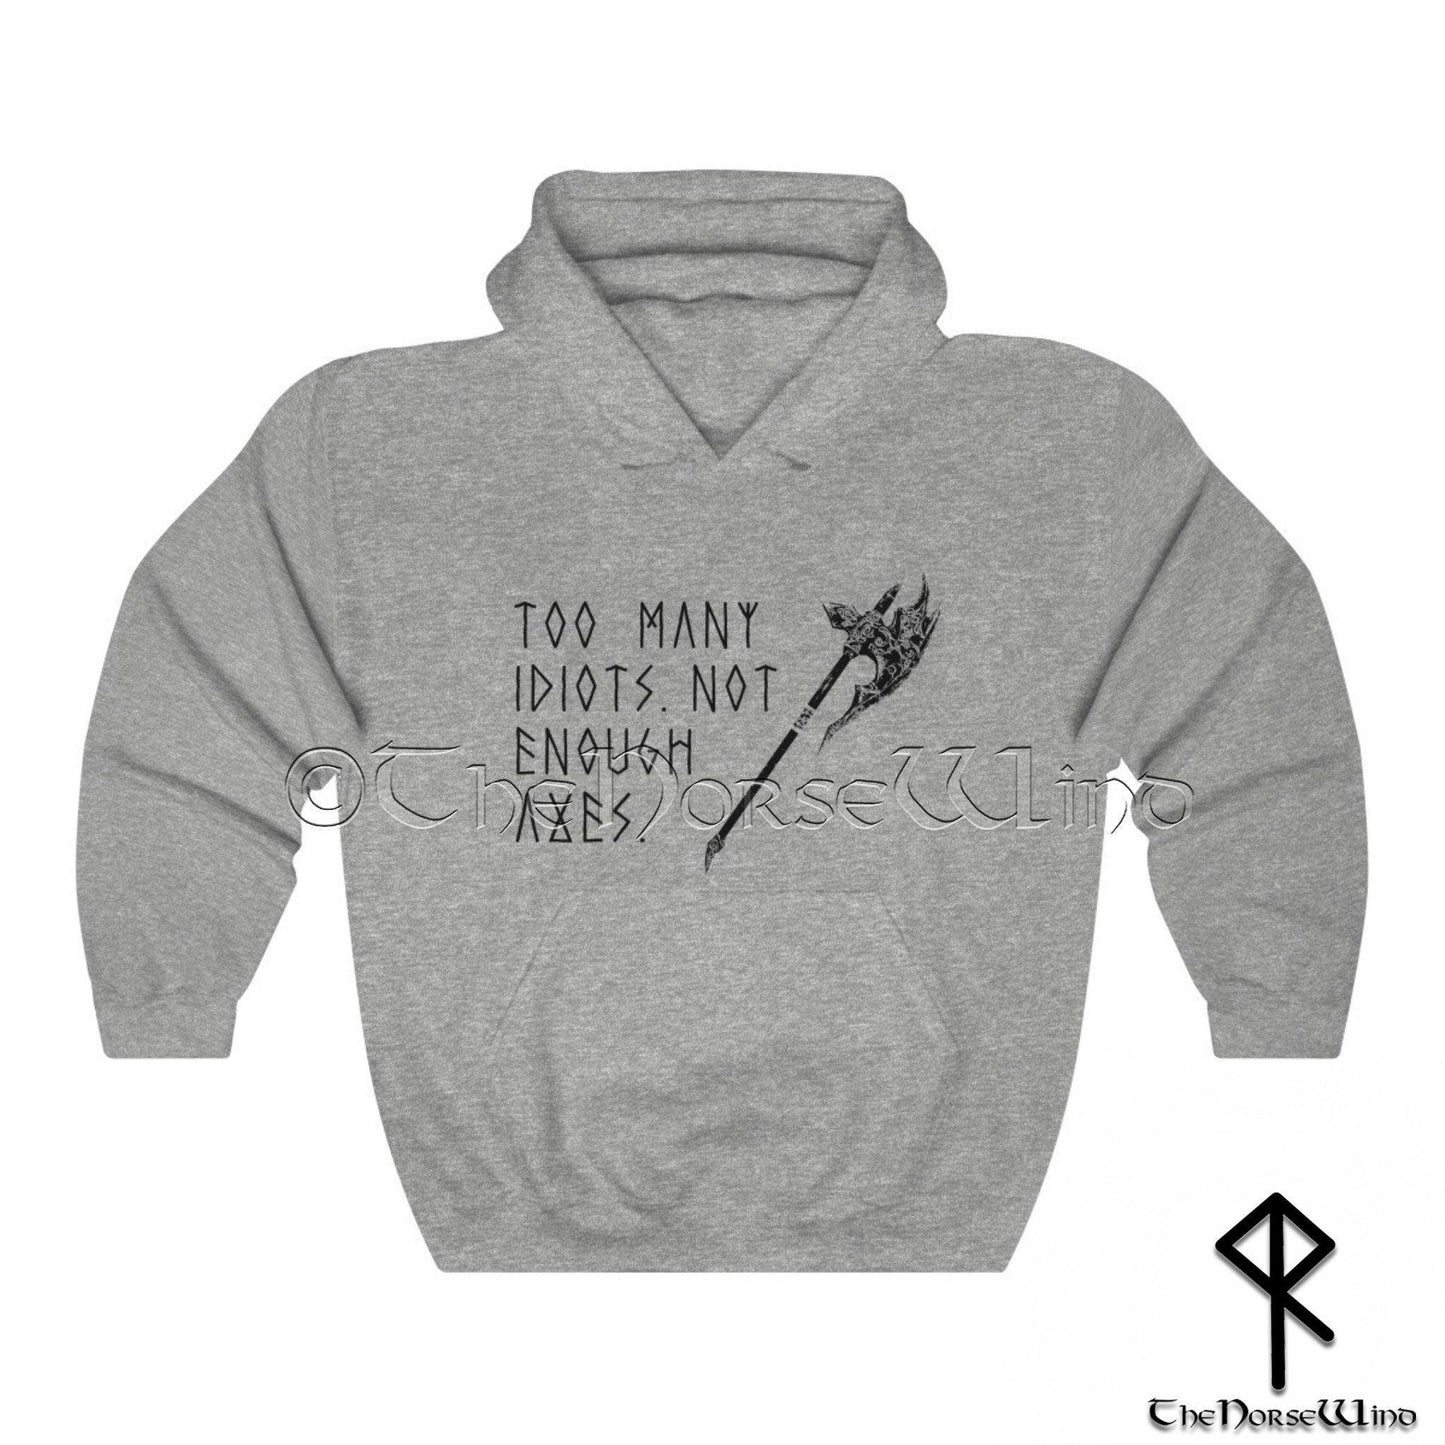 Viking Hoodie | Too Many Idiots Not Enough Axes | Unisex Viking Sweatshirt, S-5XL - TheNorseWind